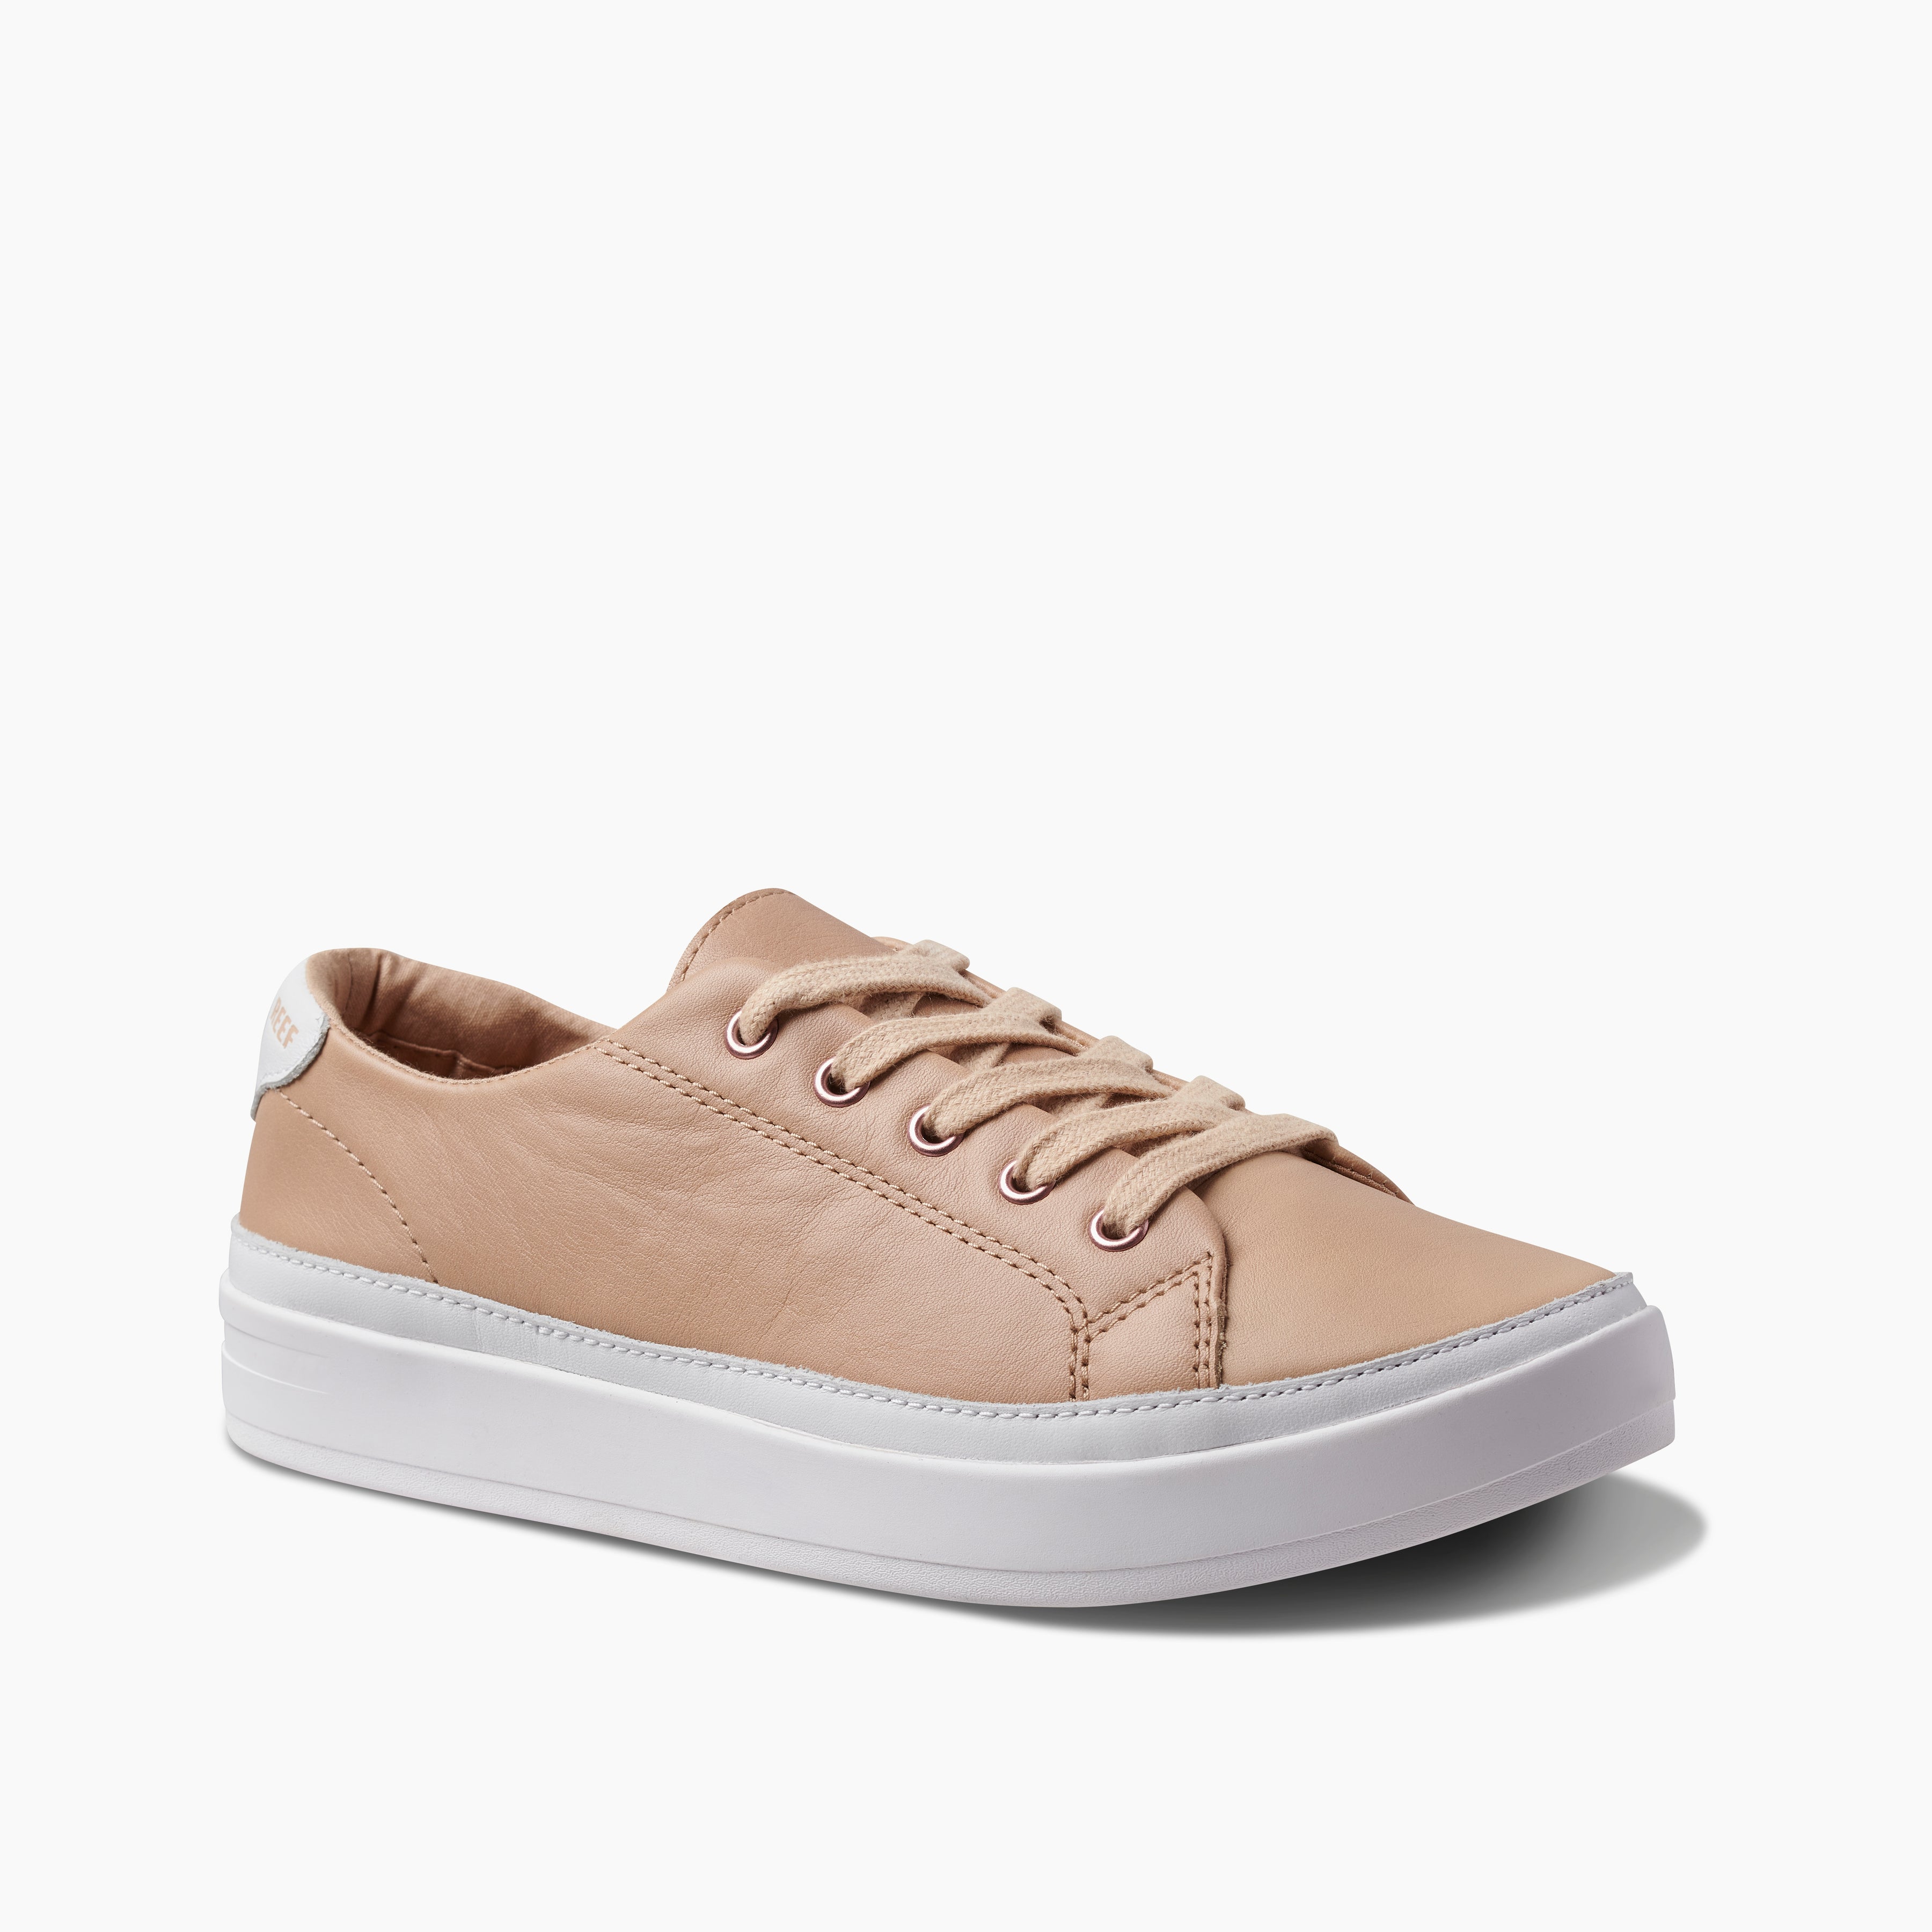 Women's Cushion Sunset Shoes in Sand | REEF®